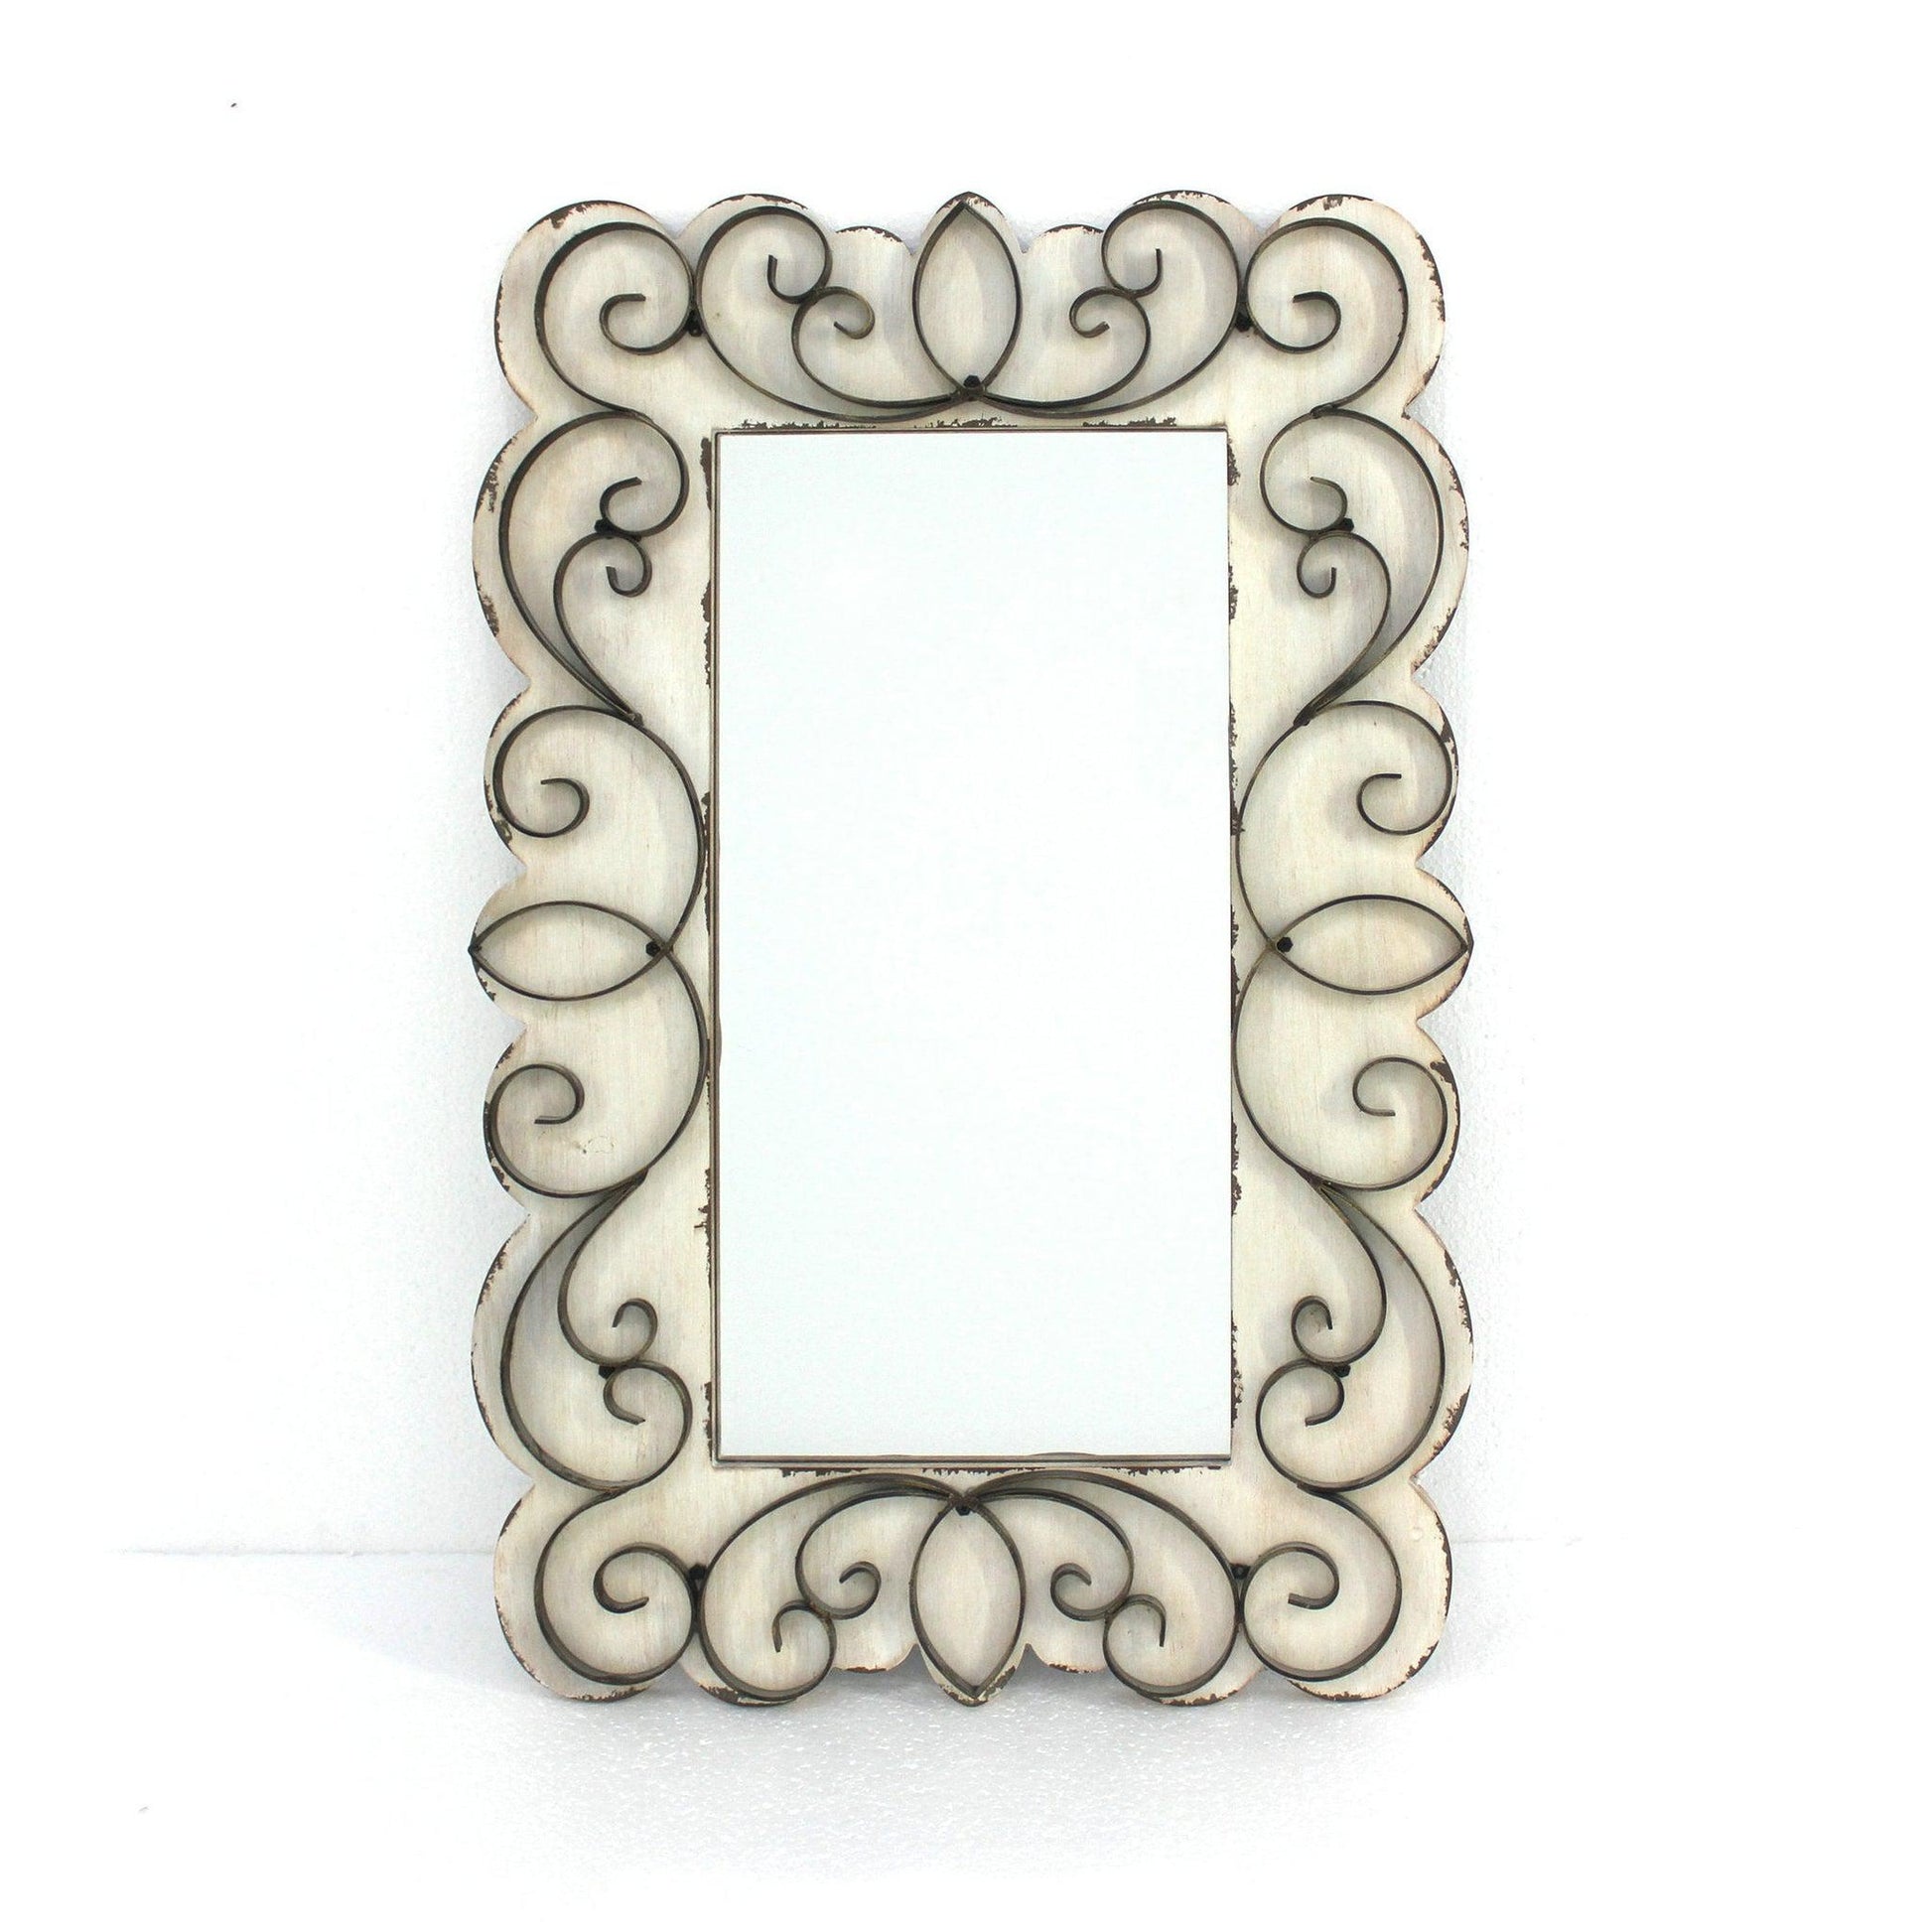 HomeRoots Vintage Decorative Wood & Metal Wall Mirror In Antique White Finish